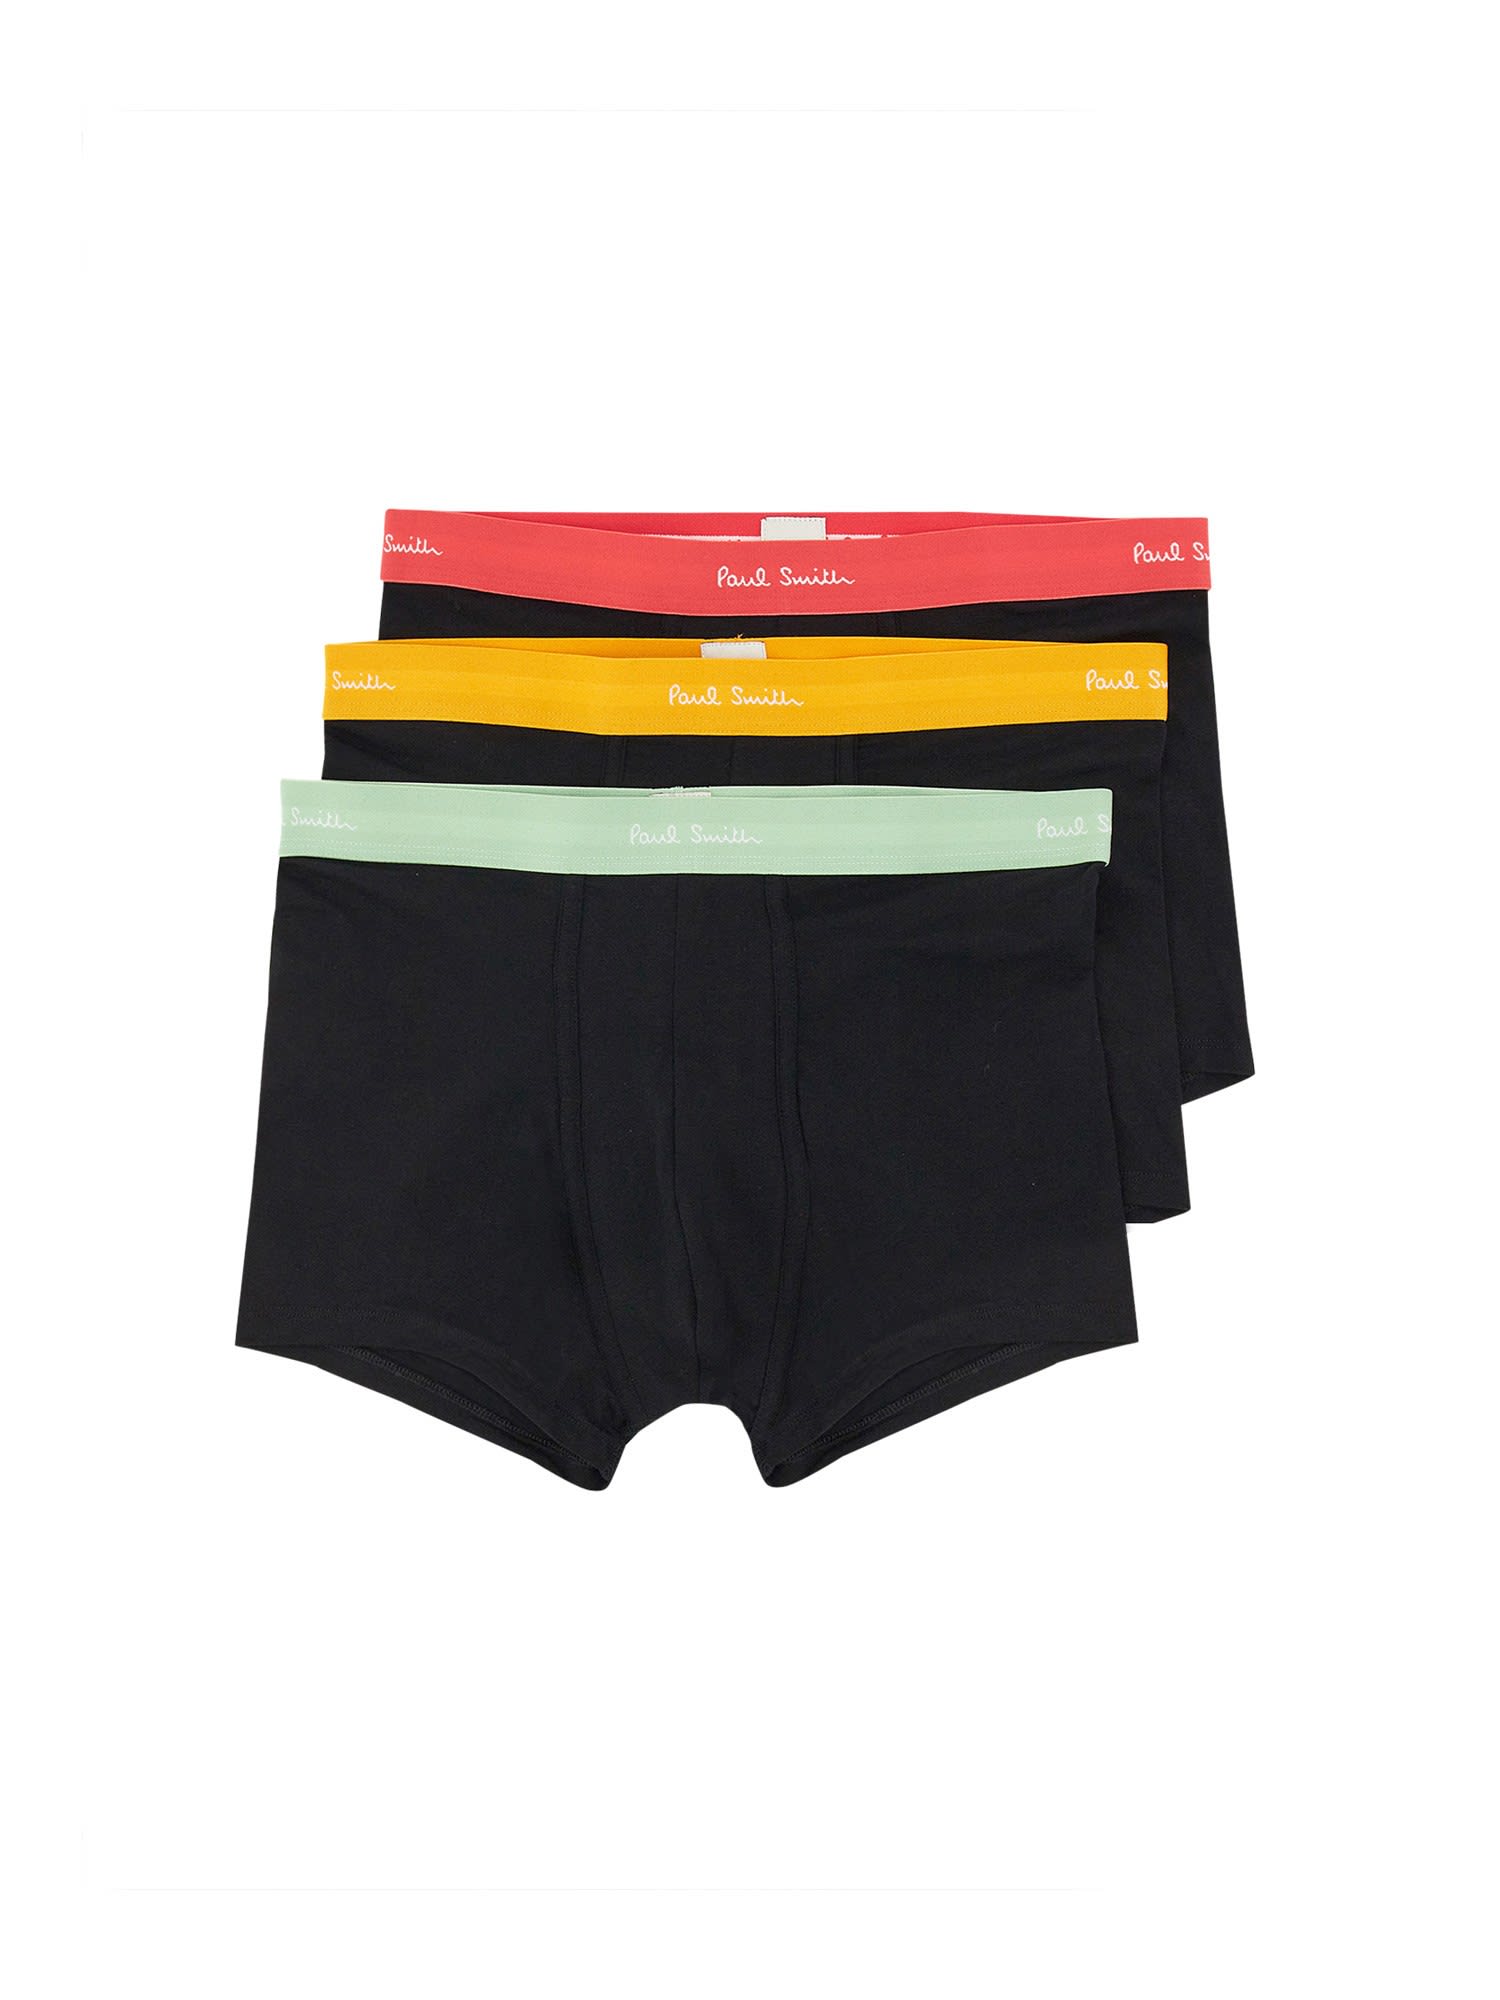 PAUL SMITH PACK OF THREE BRIEFS